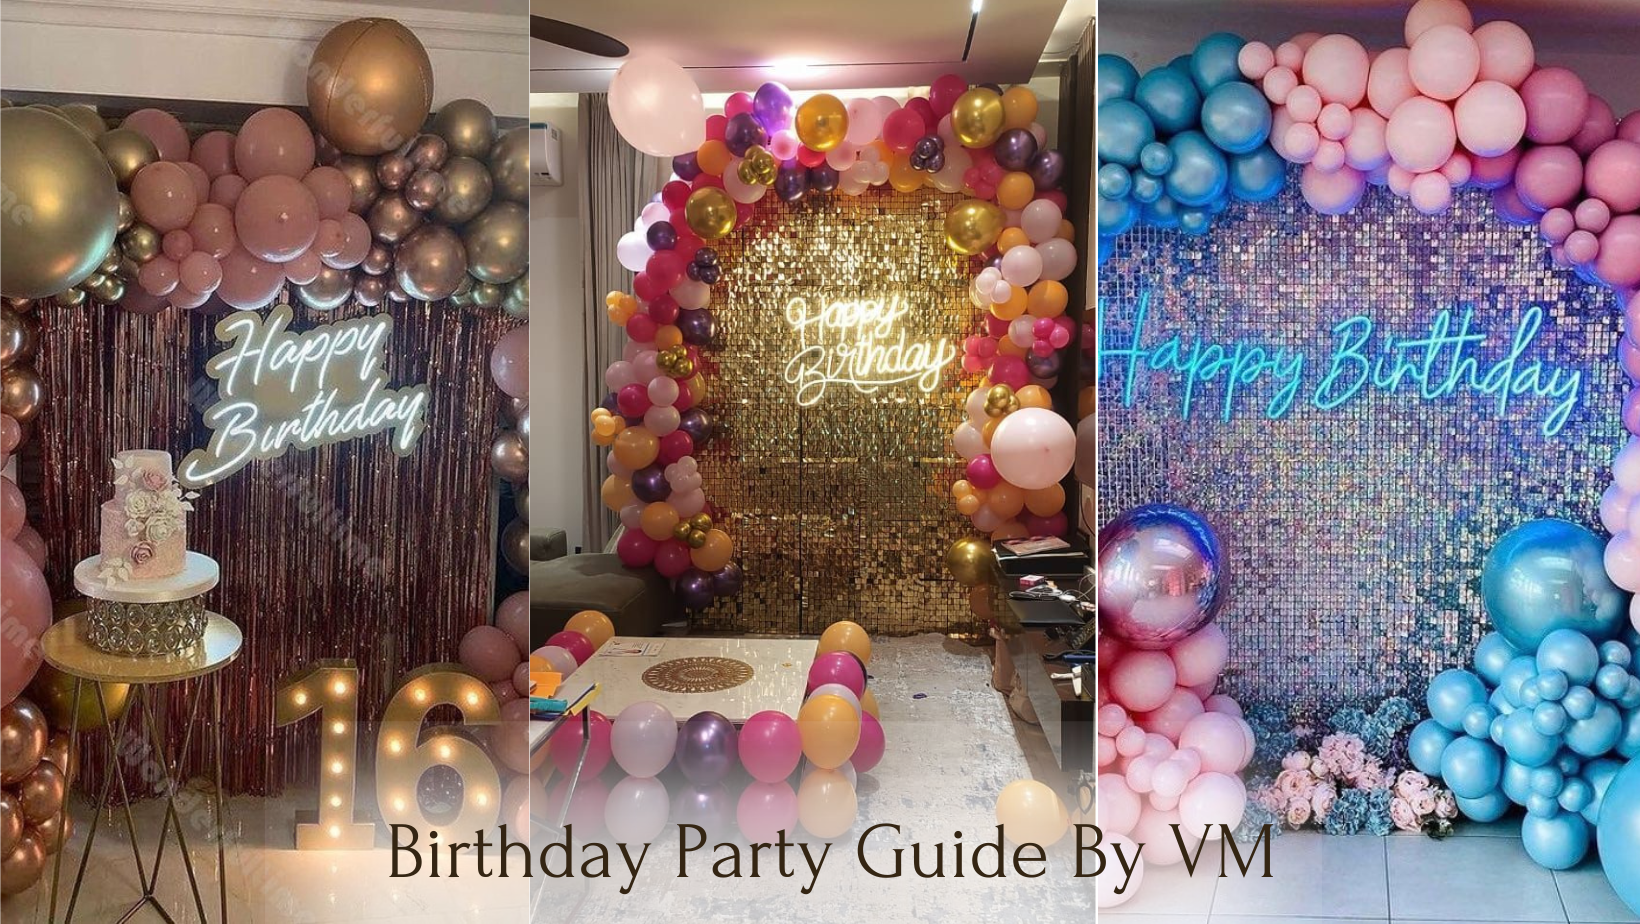 The Ultimate Birthday Party Guide By VM!